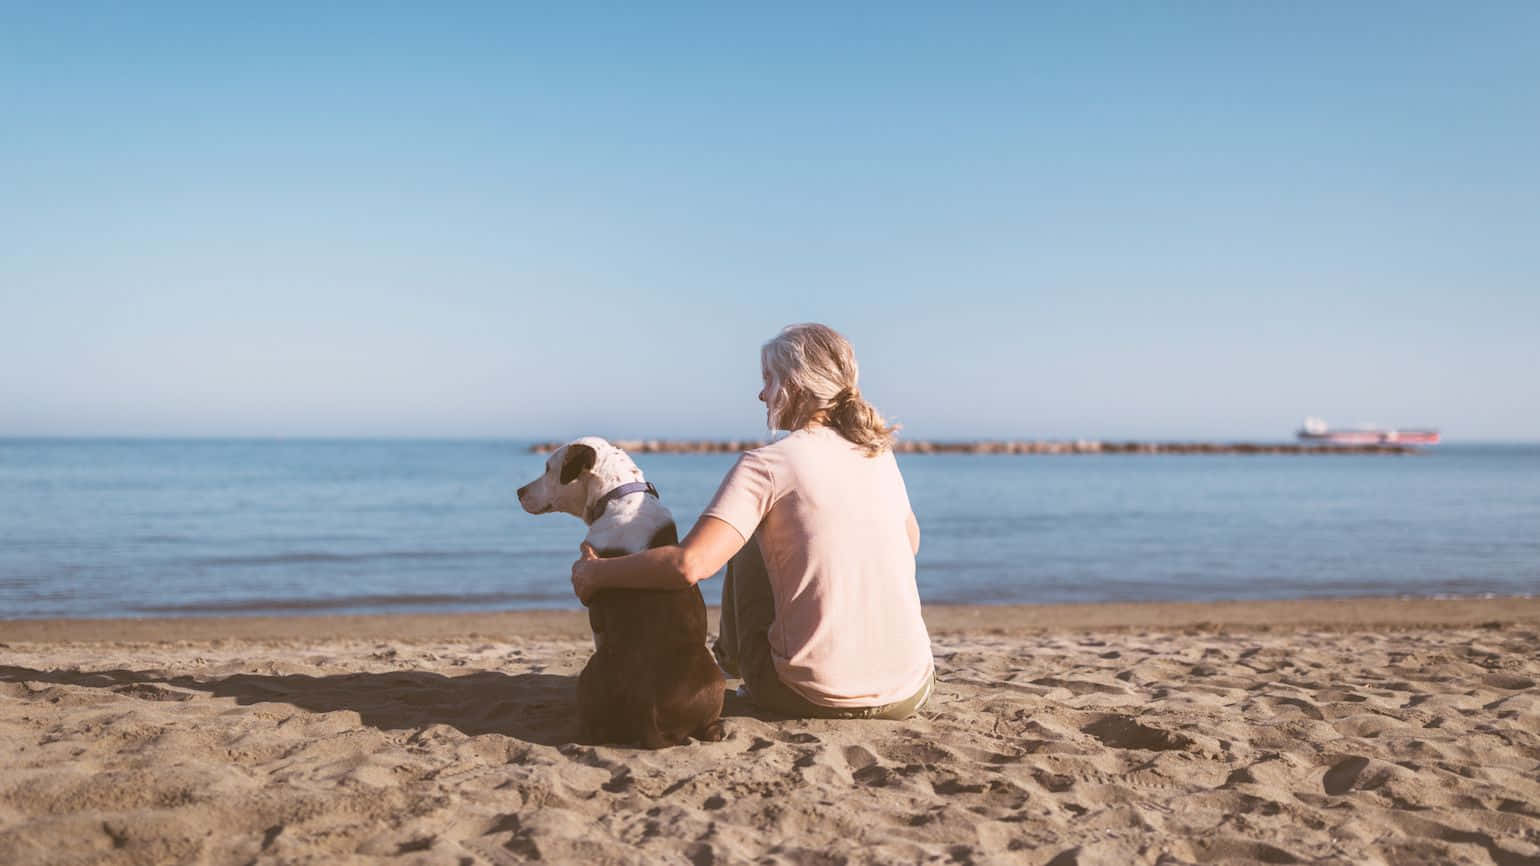 Woman Sitting On Beach With Dog Wallpaper